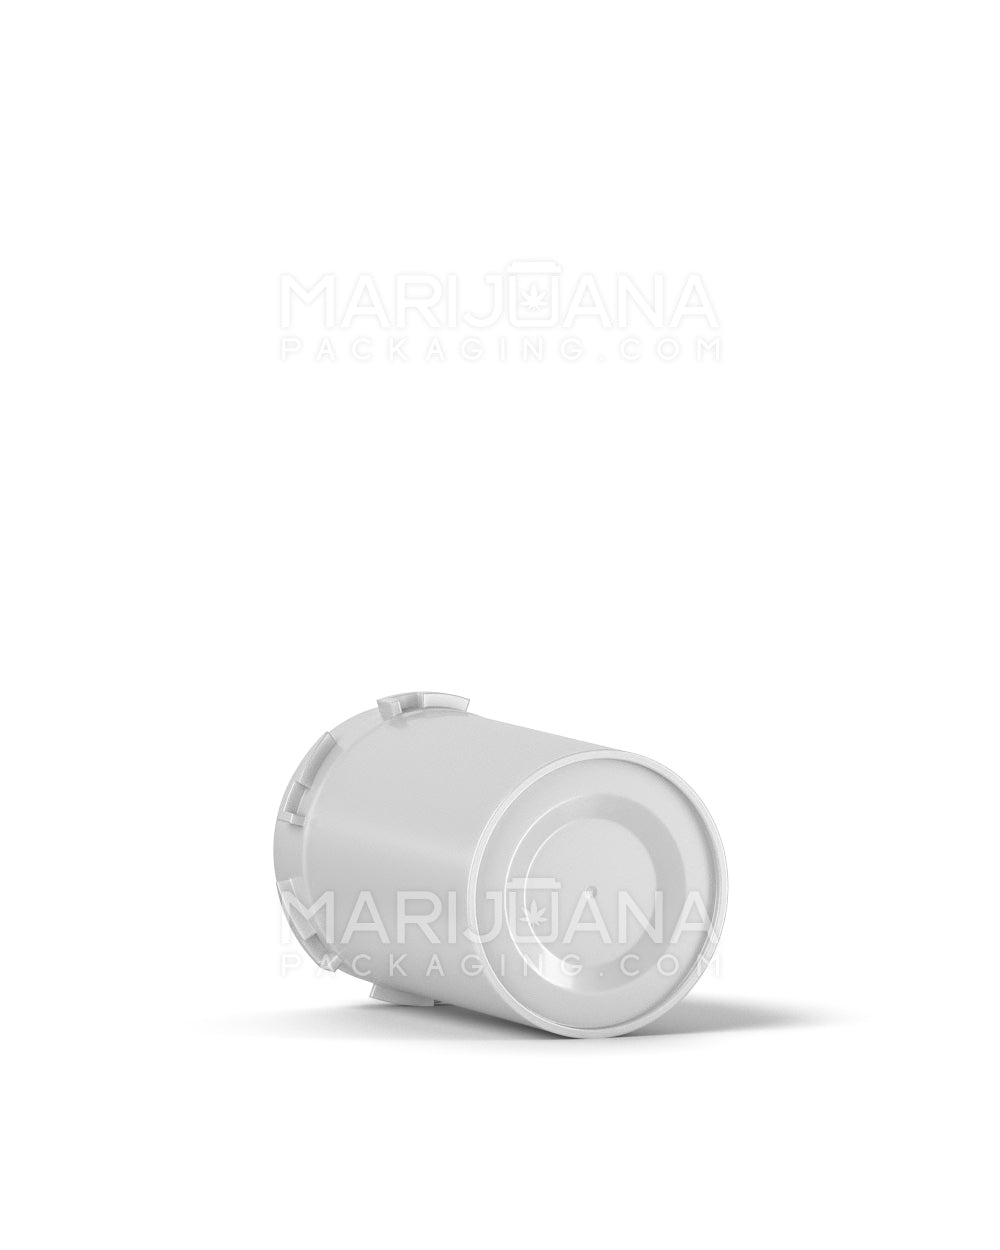 Child Resistant | Opaque Silver Blank Reversible Cap Vials | 20dr - 3.5g - 240 Count - 9